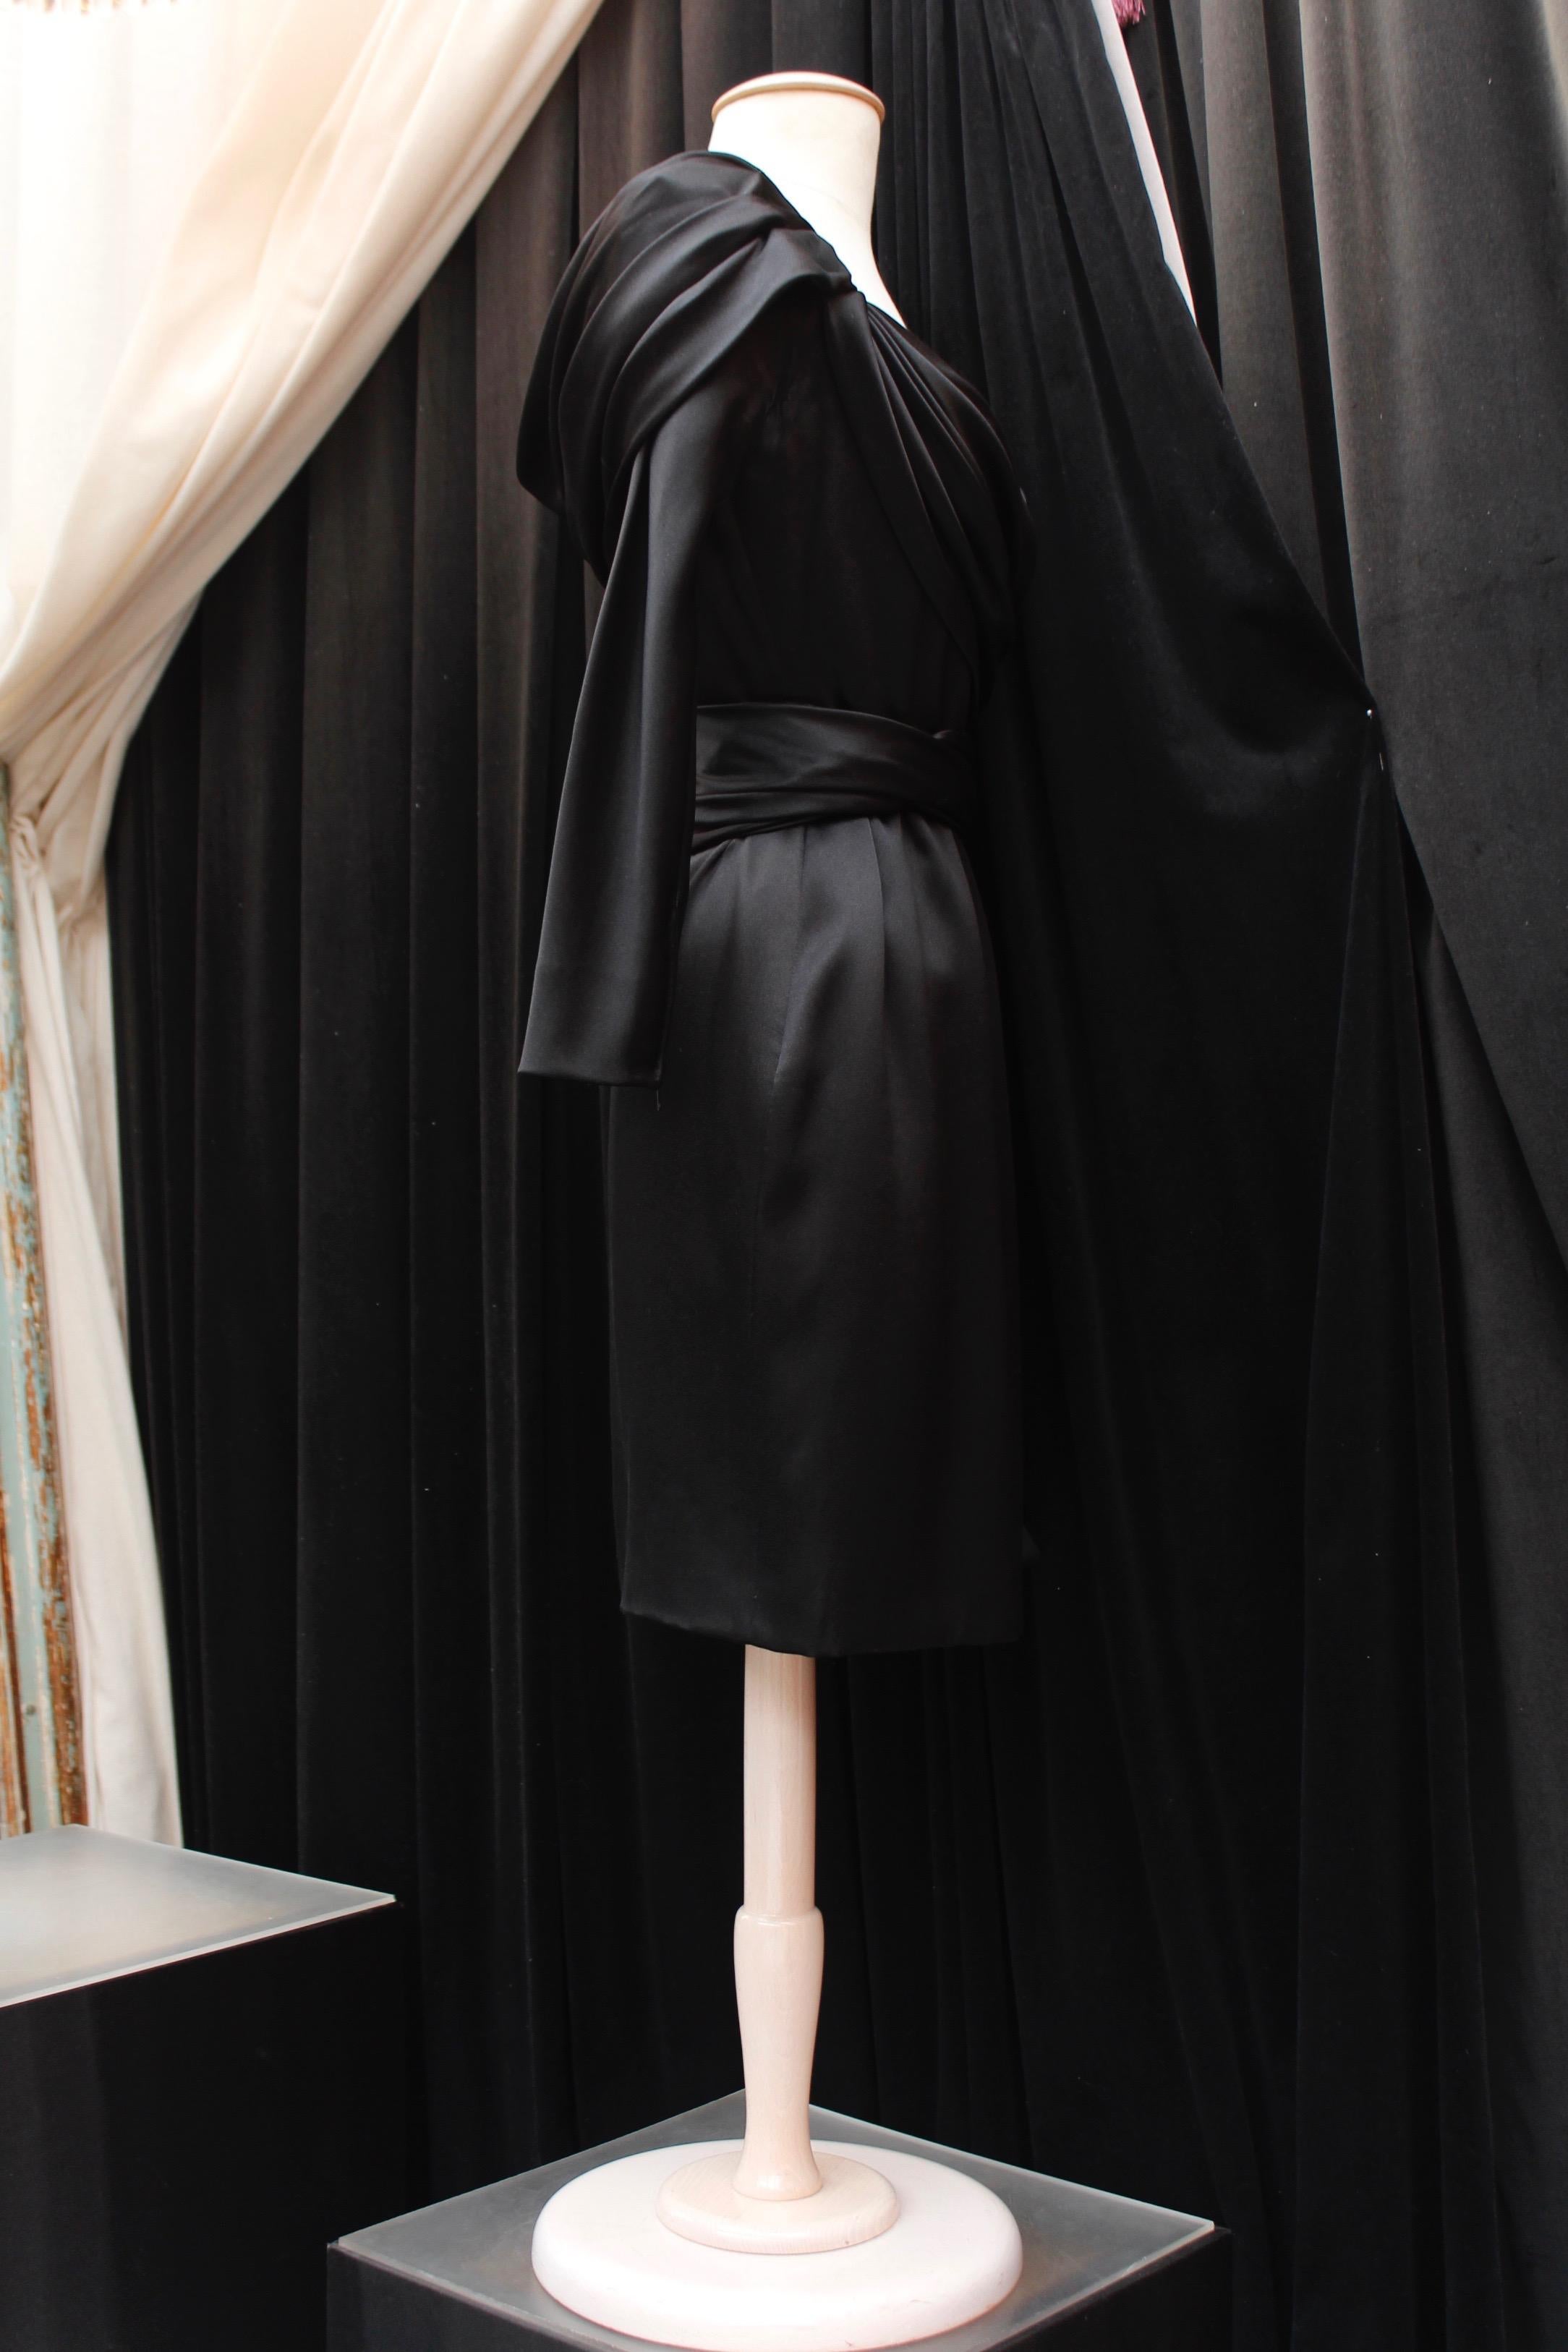 GIVENCHY HAUTE COUTURE (Made in France) Gorgeous short evening sheath dress composed of black silk satin. It features long sleeves and wide  off-the-shoulder neckline, a wrap cut decorated with pleats and drape effect, and a cinched waist